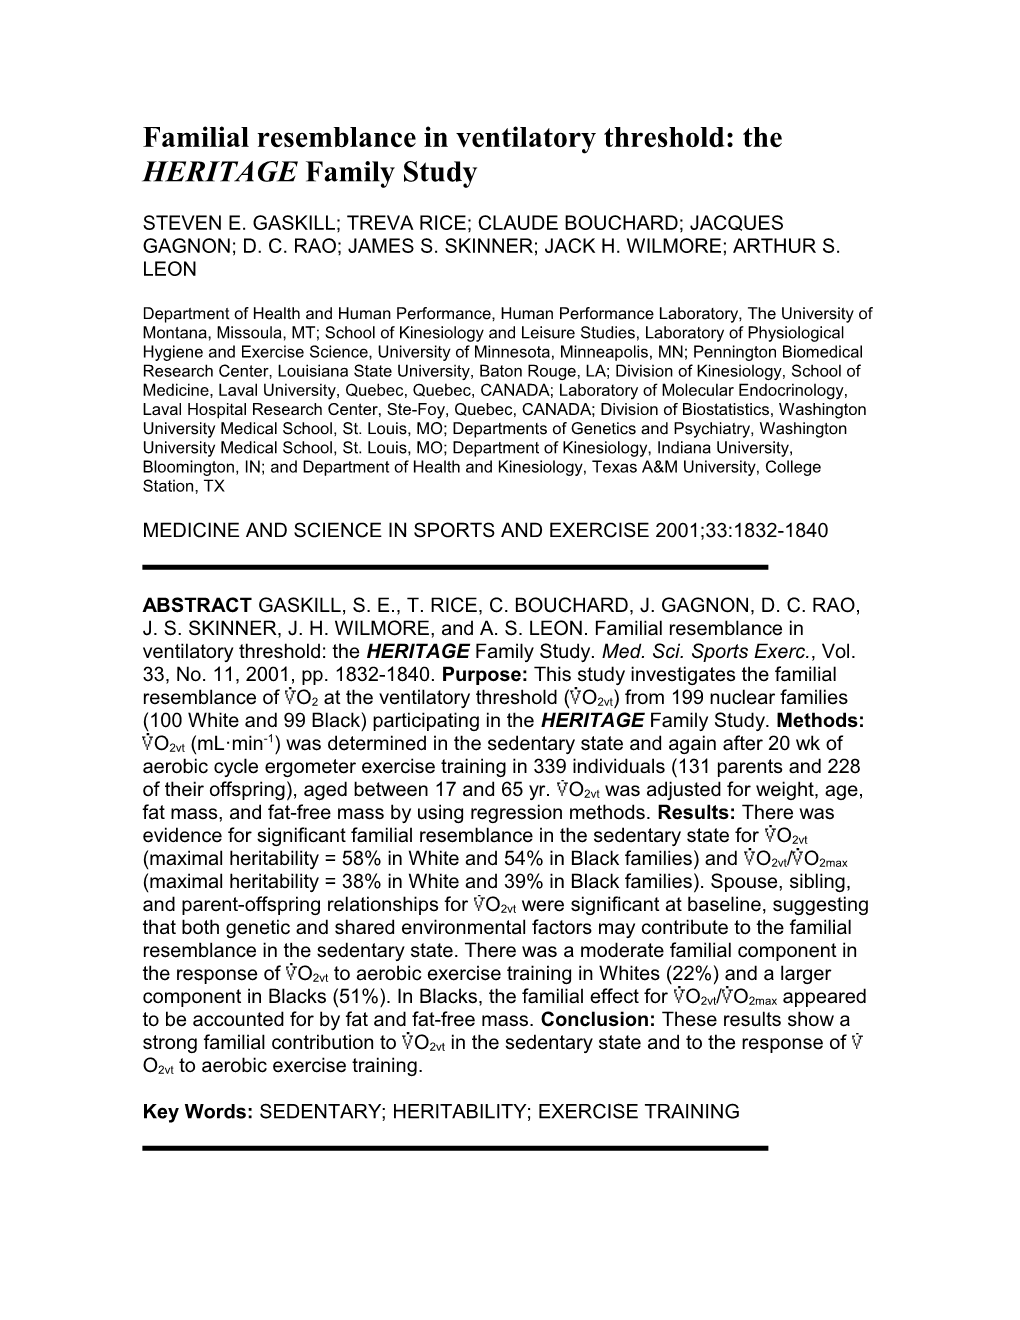 Familial Resemblance in Ventilatory Threshold: the HERITAGE Family Study